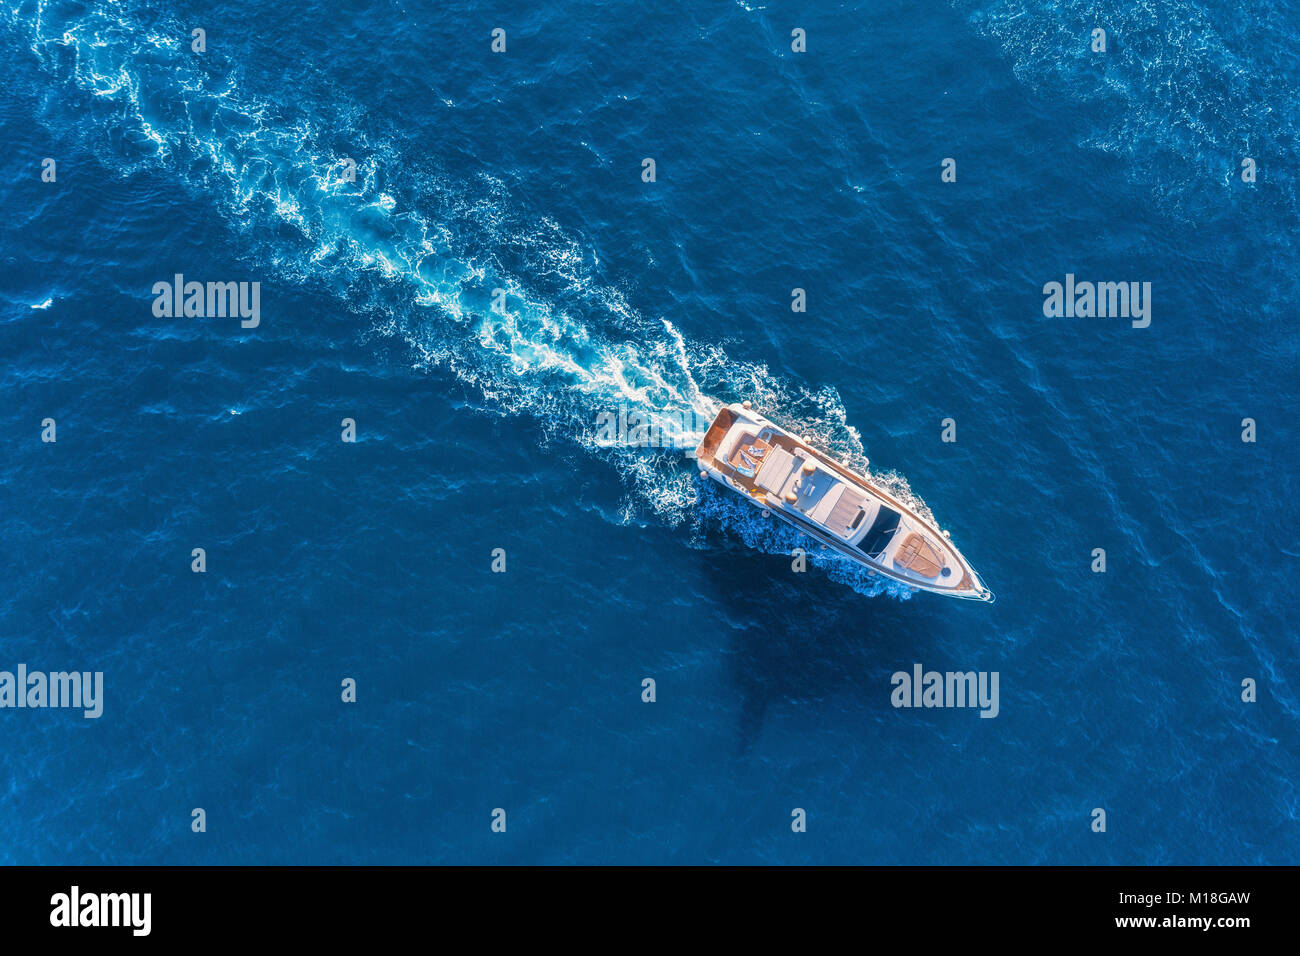 Yacht at the sea in Europe. Aerial view of luxury floating ship at sunset. Colorful landscape with boat in marina bay, blue sea. Top view from drone o Stock Photo